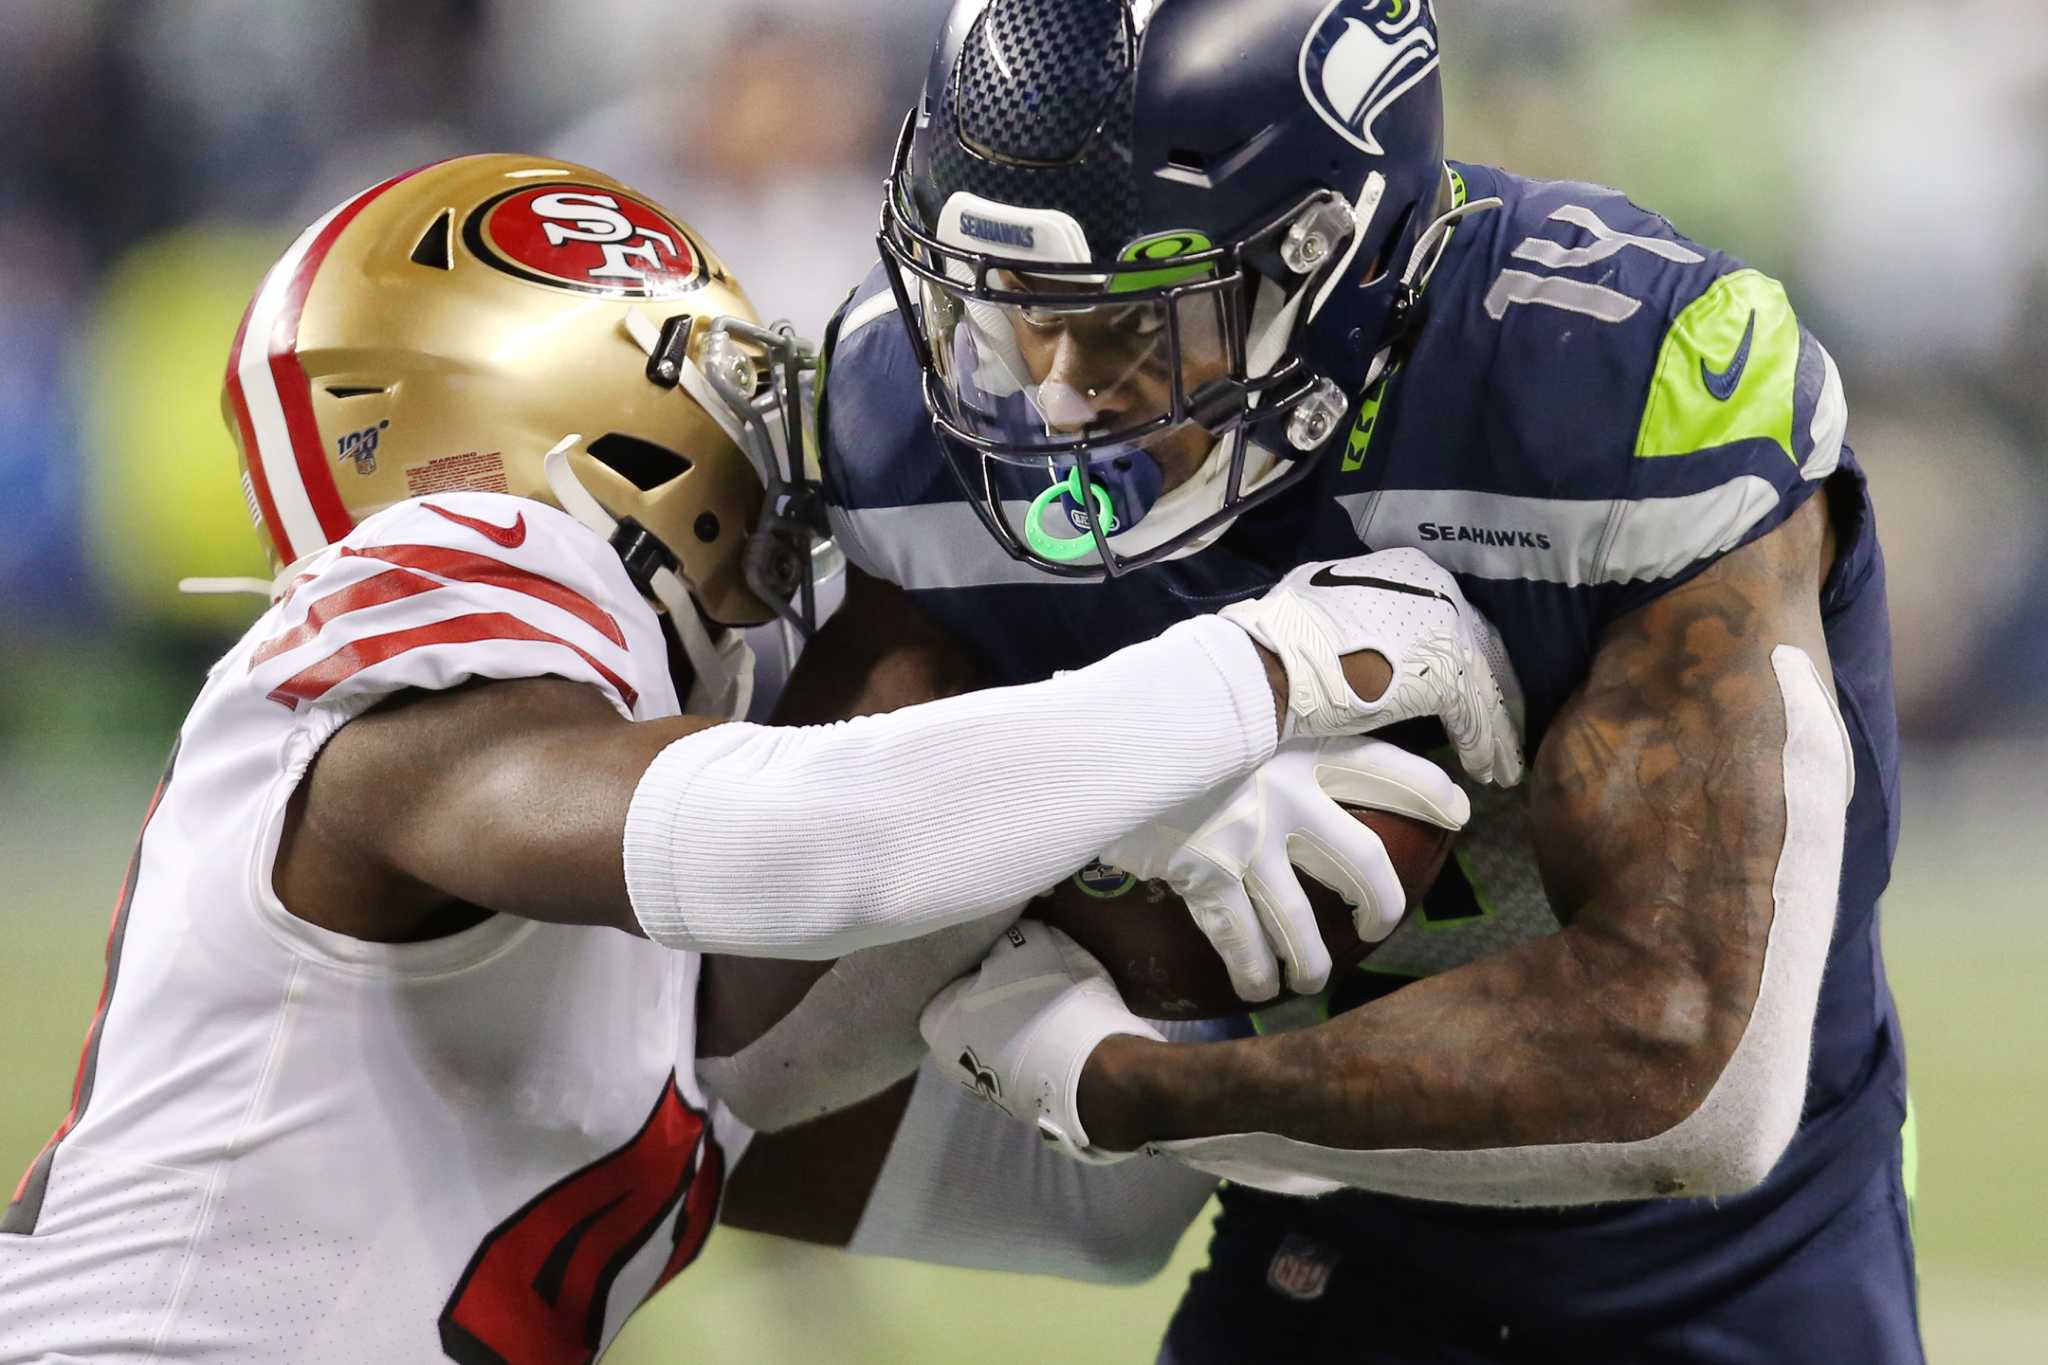 49ers win NFC West title with insane 26-21 victory over Seahawks